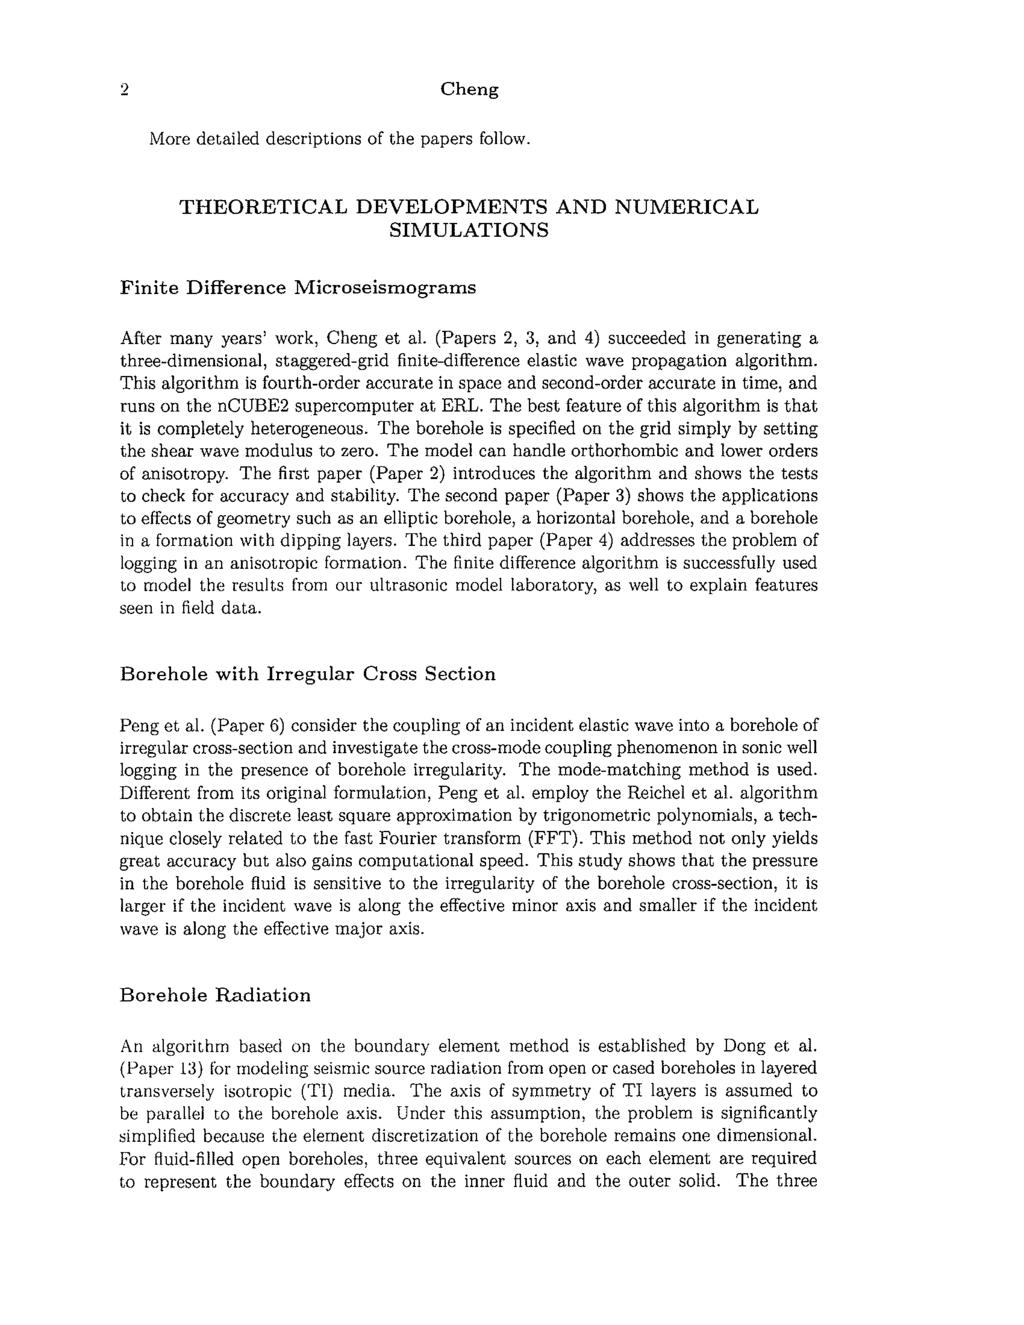 2 Cheng More detailed descriptions of the papers follow. THEORETICAL DEVELOPMENTS AND NUMERICAL SIMULATIONS Finite Difference Microseismograms After many years' work, Cheng et al.